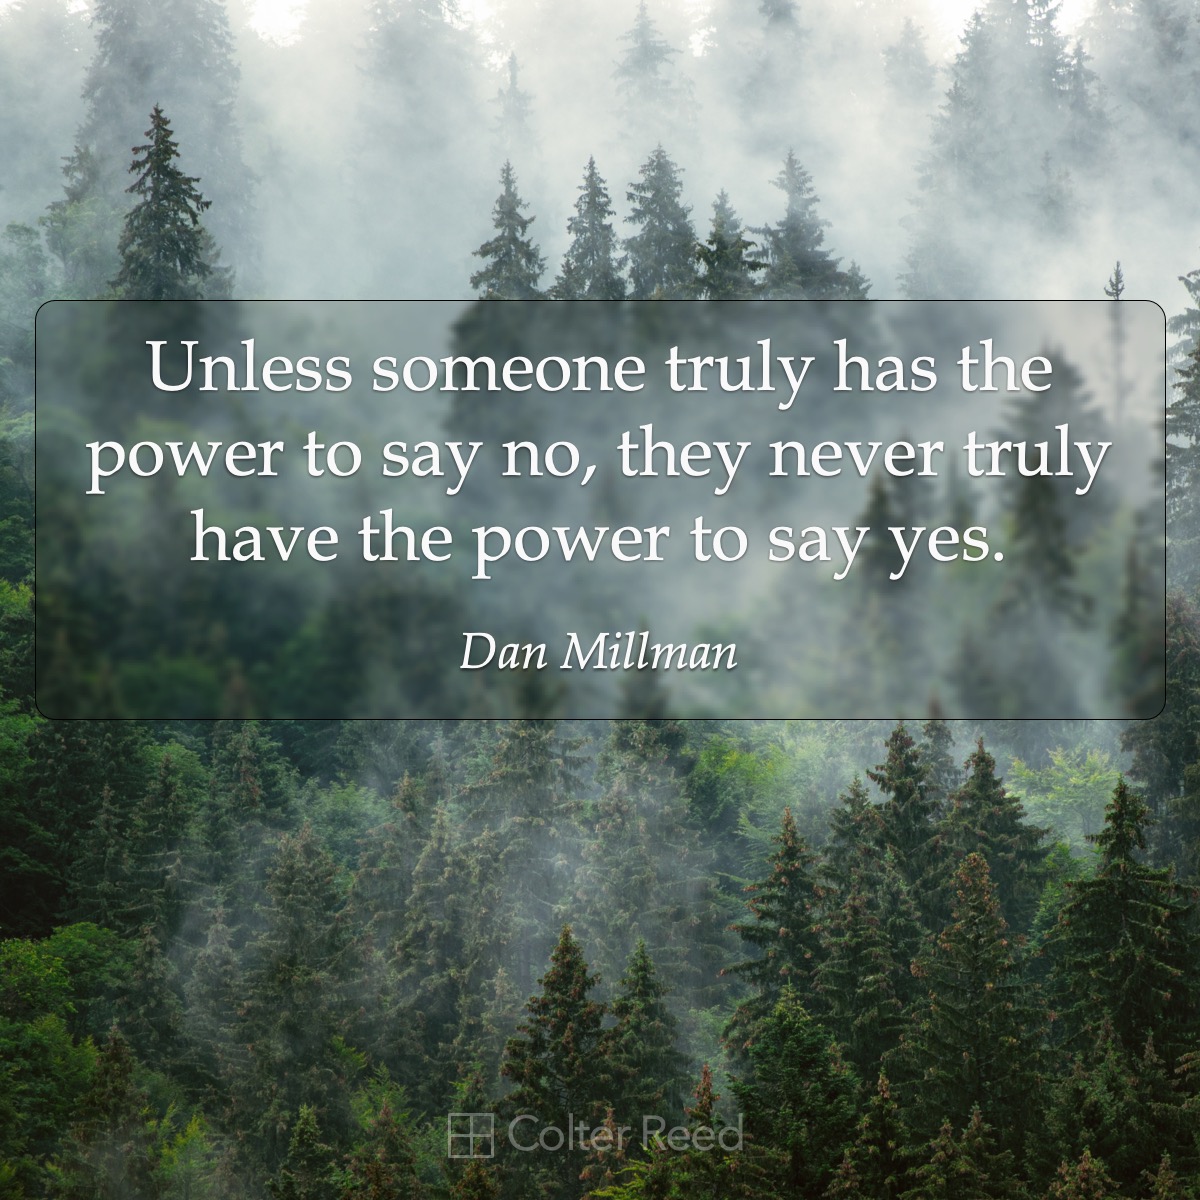 Unless someone truly has the power to say no, they never truly have the power to say yes. —Dan Millman